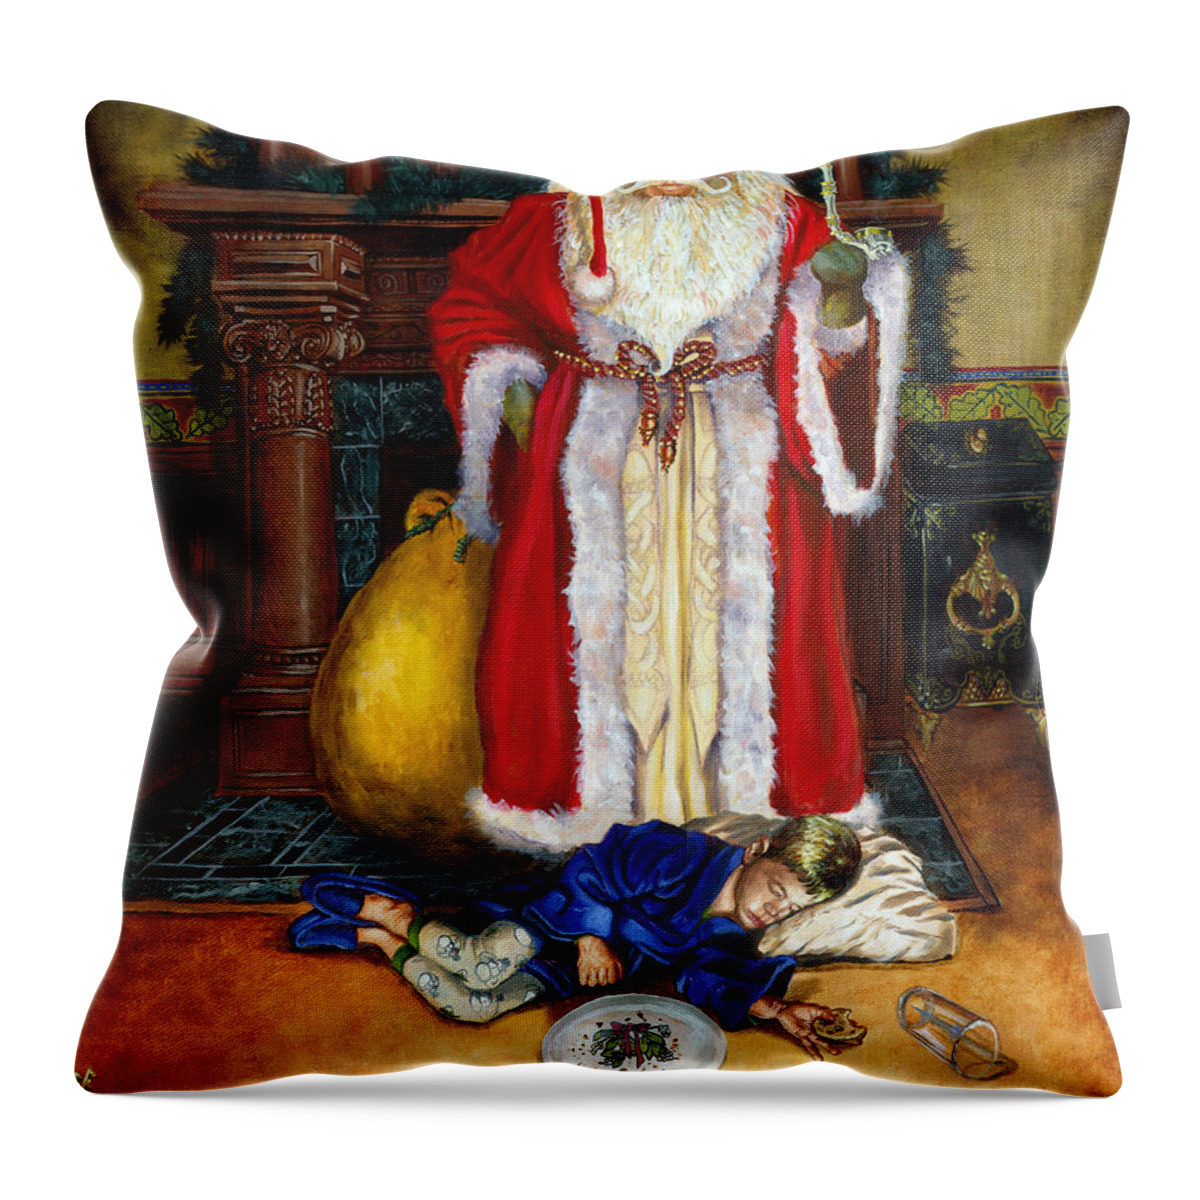 Christmas Throw Pillow featuring the painting Santas Littlest Helper by Jeff Brimley